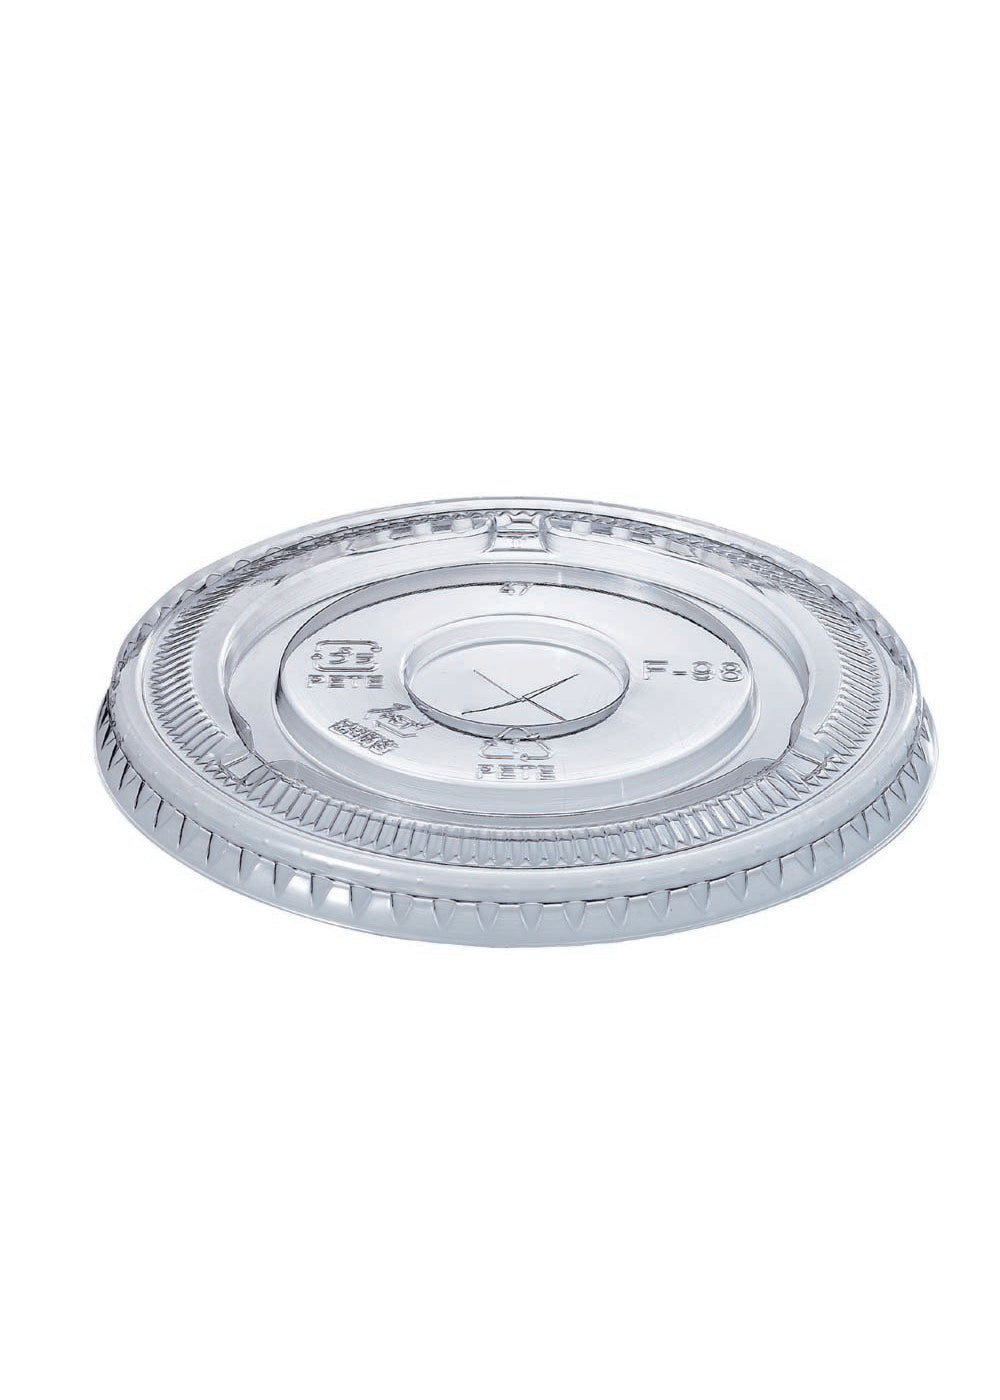 F98 No Hole - HONOR PET Flat Lid for DIA.98mm Cup (No Hole)